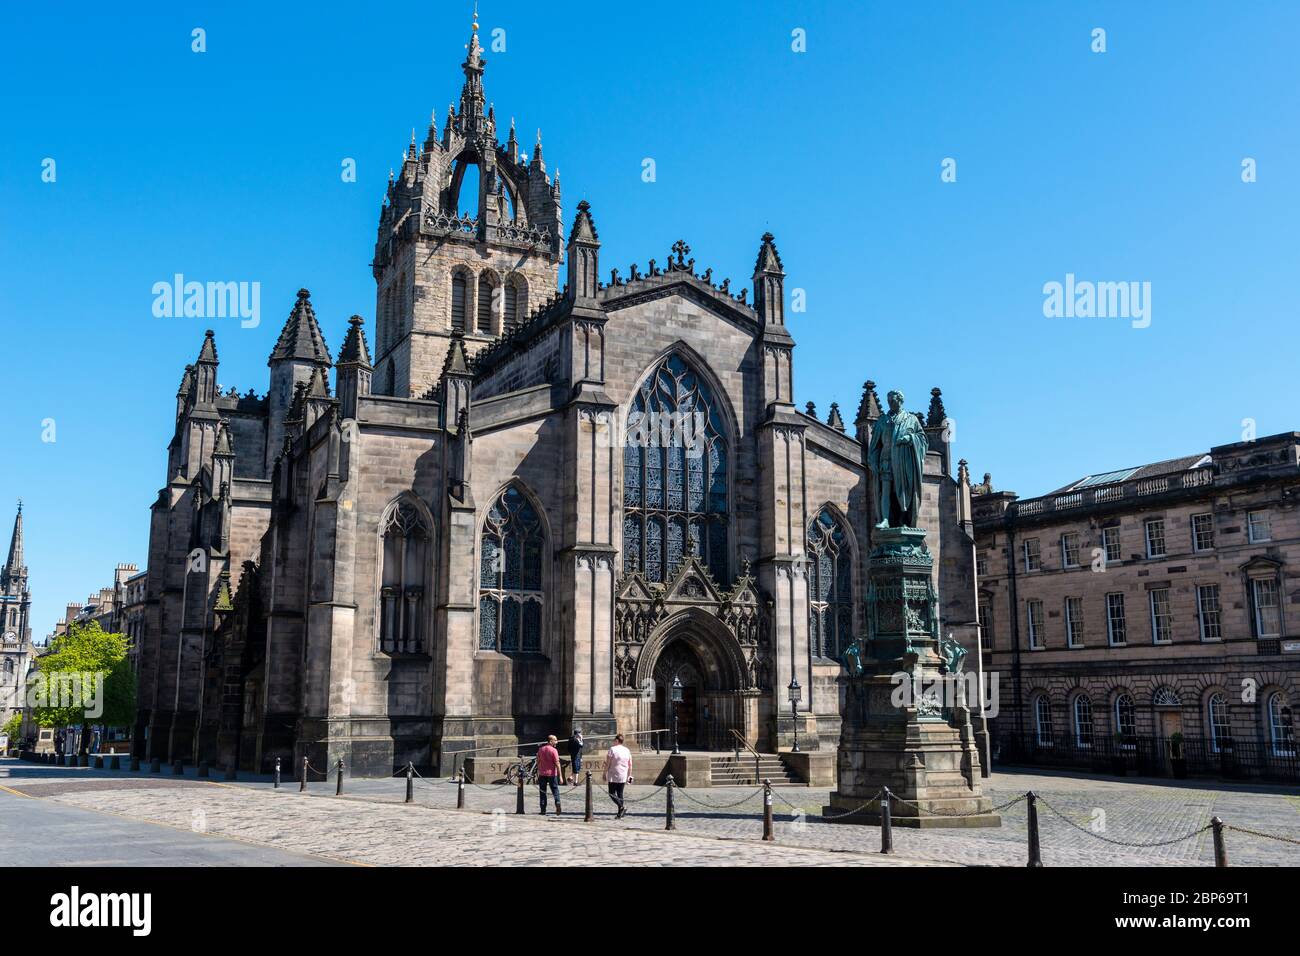 Parliament Square in front of St Giles Cathedral with few visitors during coronavirus lockdown - Edinburgh Old Town, Scotland, UK Stock Photo